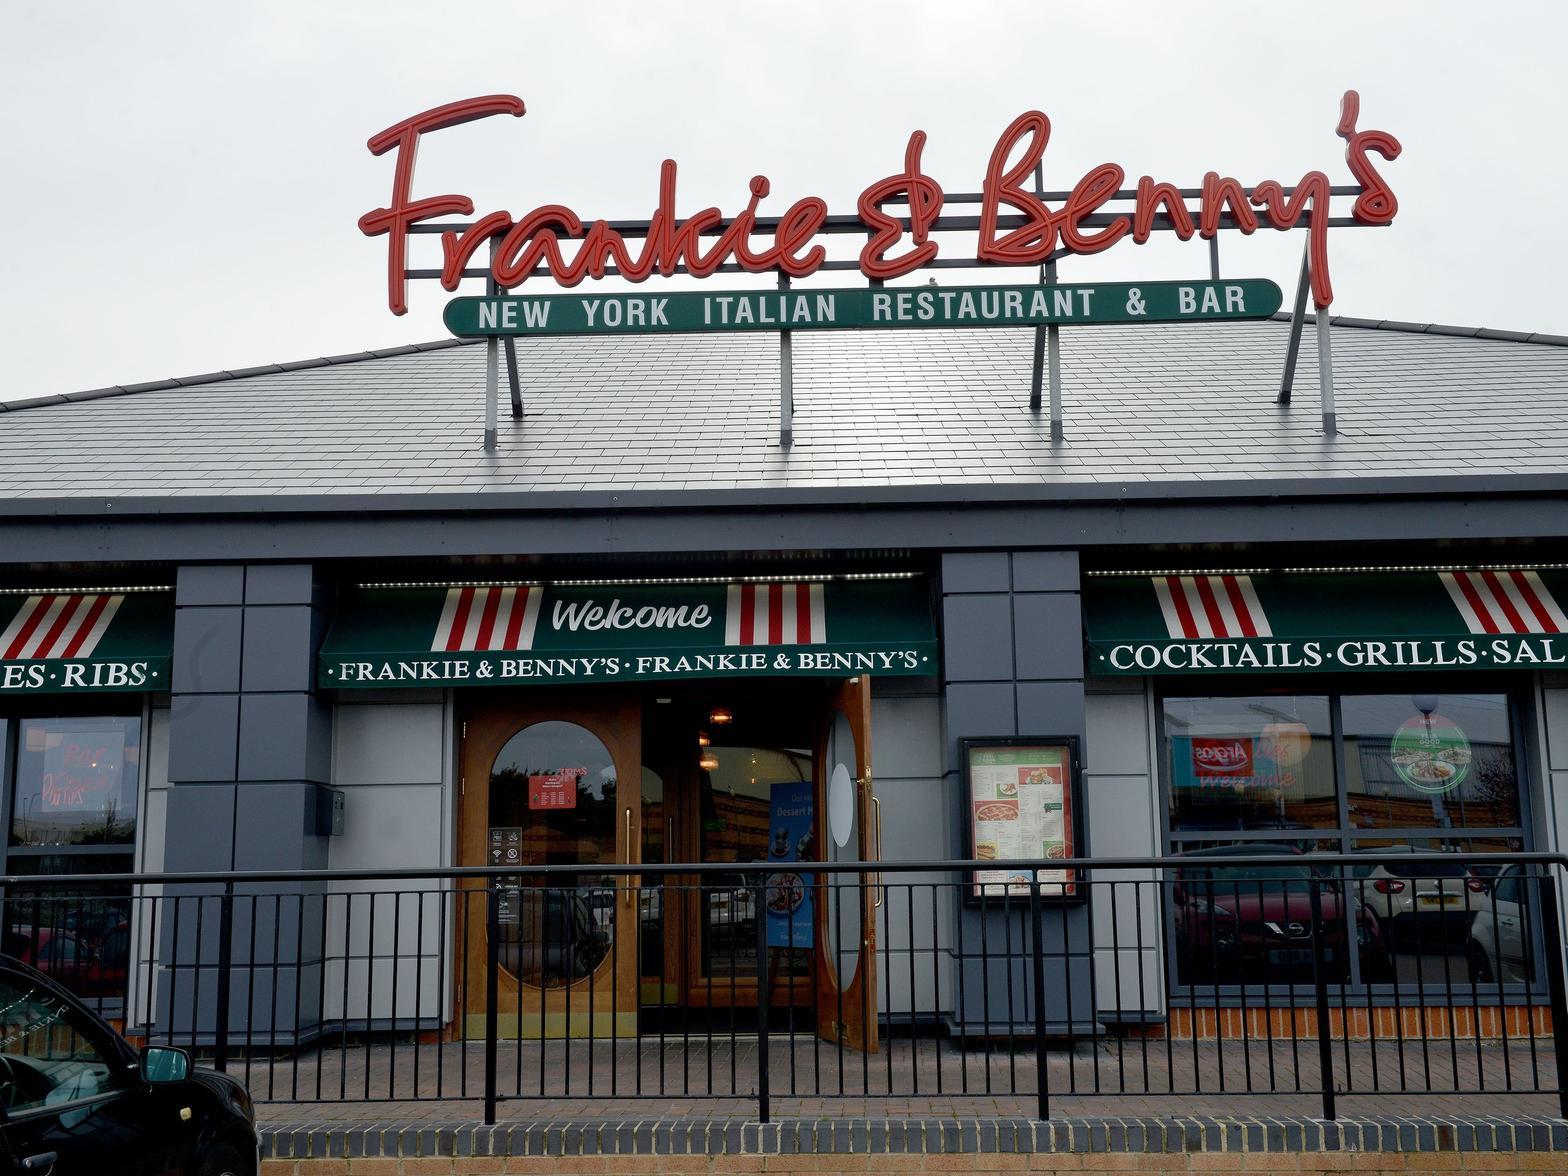 Inspired by traditional Italian food, Frankie and Benny's serve everything from pizza and pasta to burgers and waffles. What's not to love?